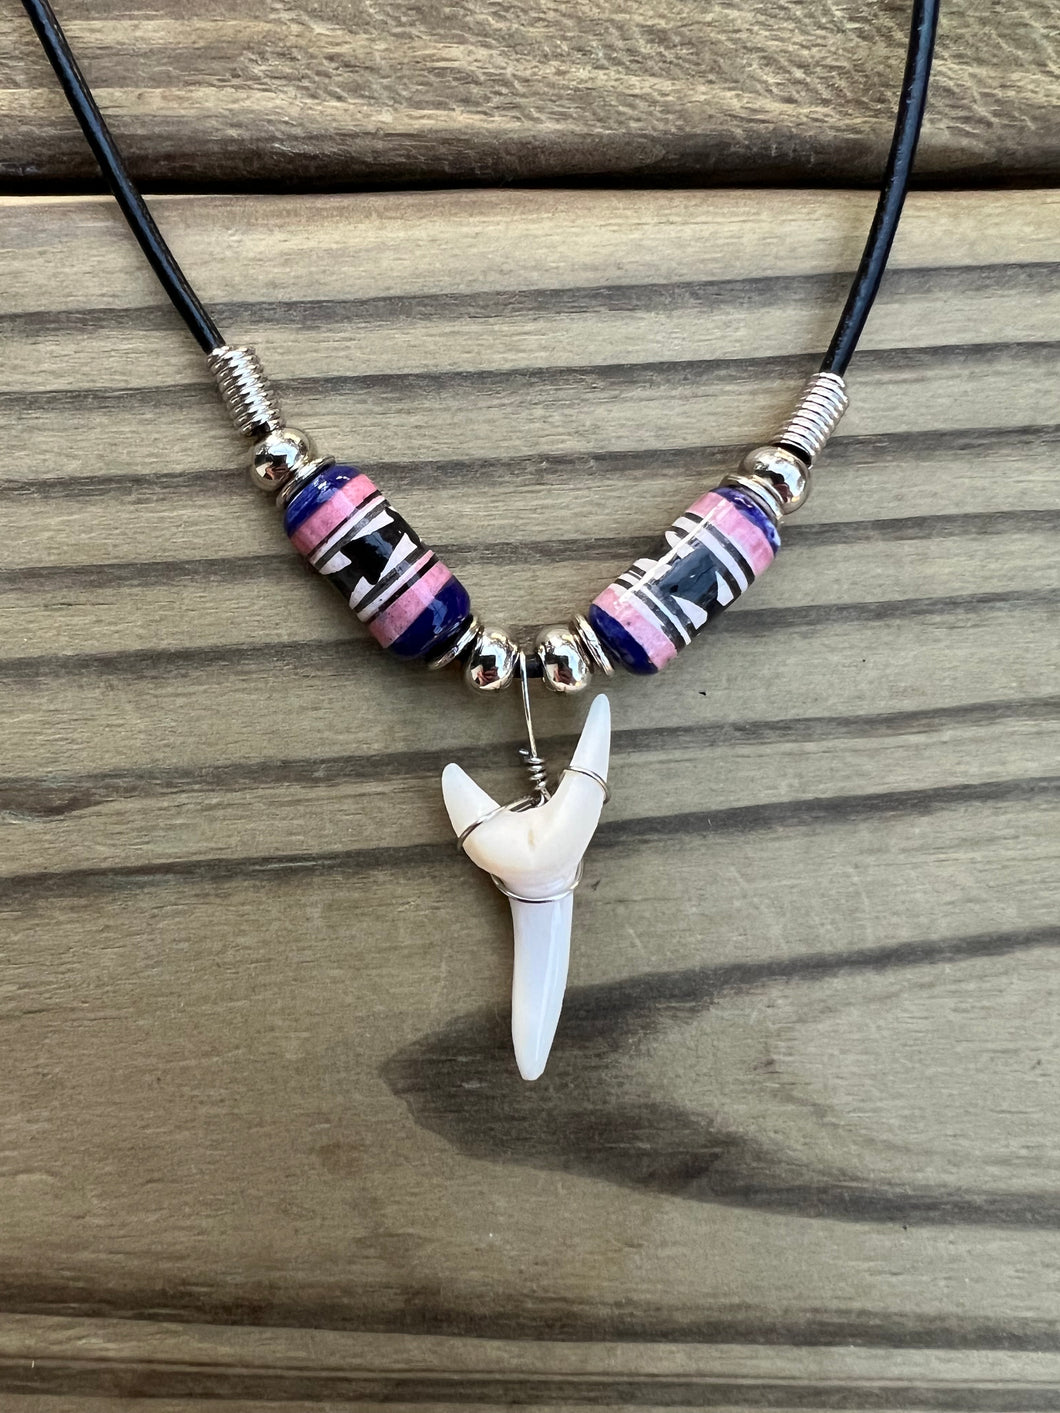 White Mako Shark Tooth Necklace With Purple and Pink Peruvian Ceramic Beads